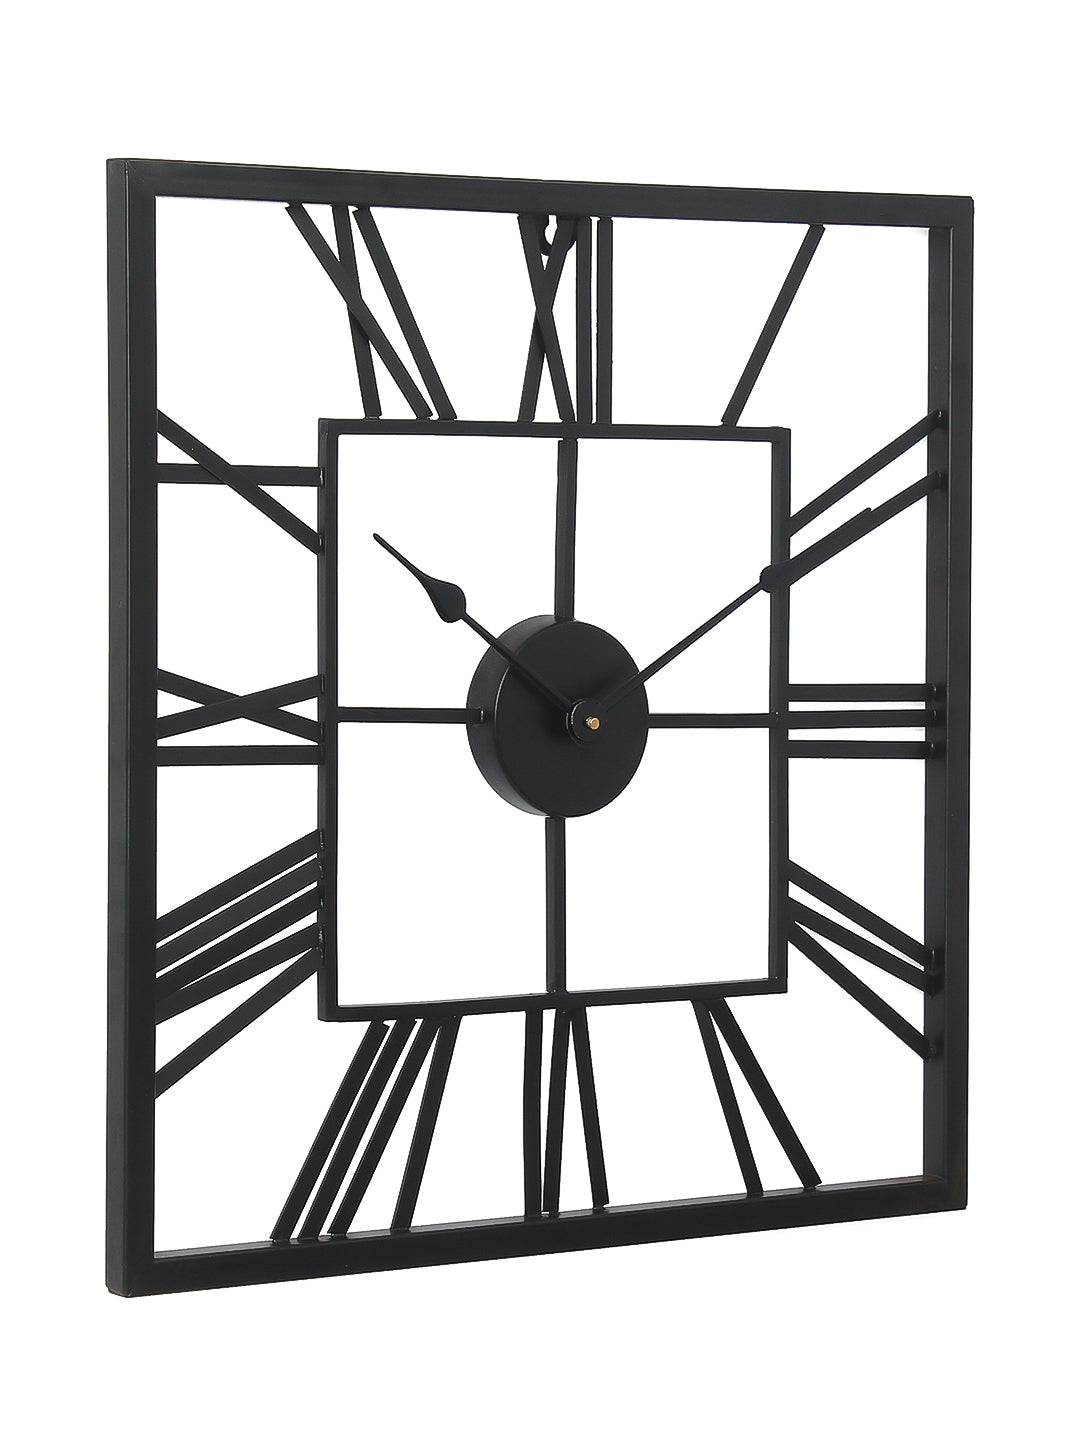 Black Iron Square Handcrafted Analog Roman Numeral Wall Clock Without Glass 5